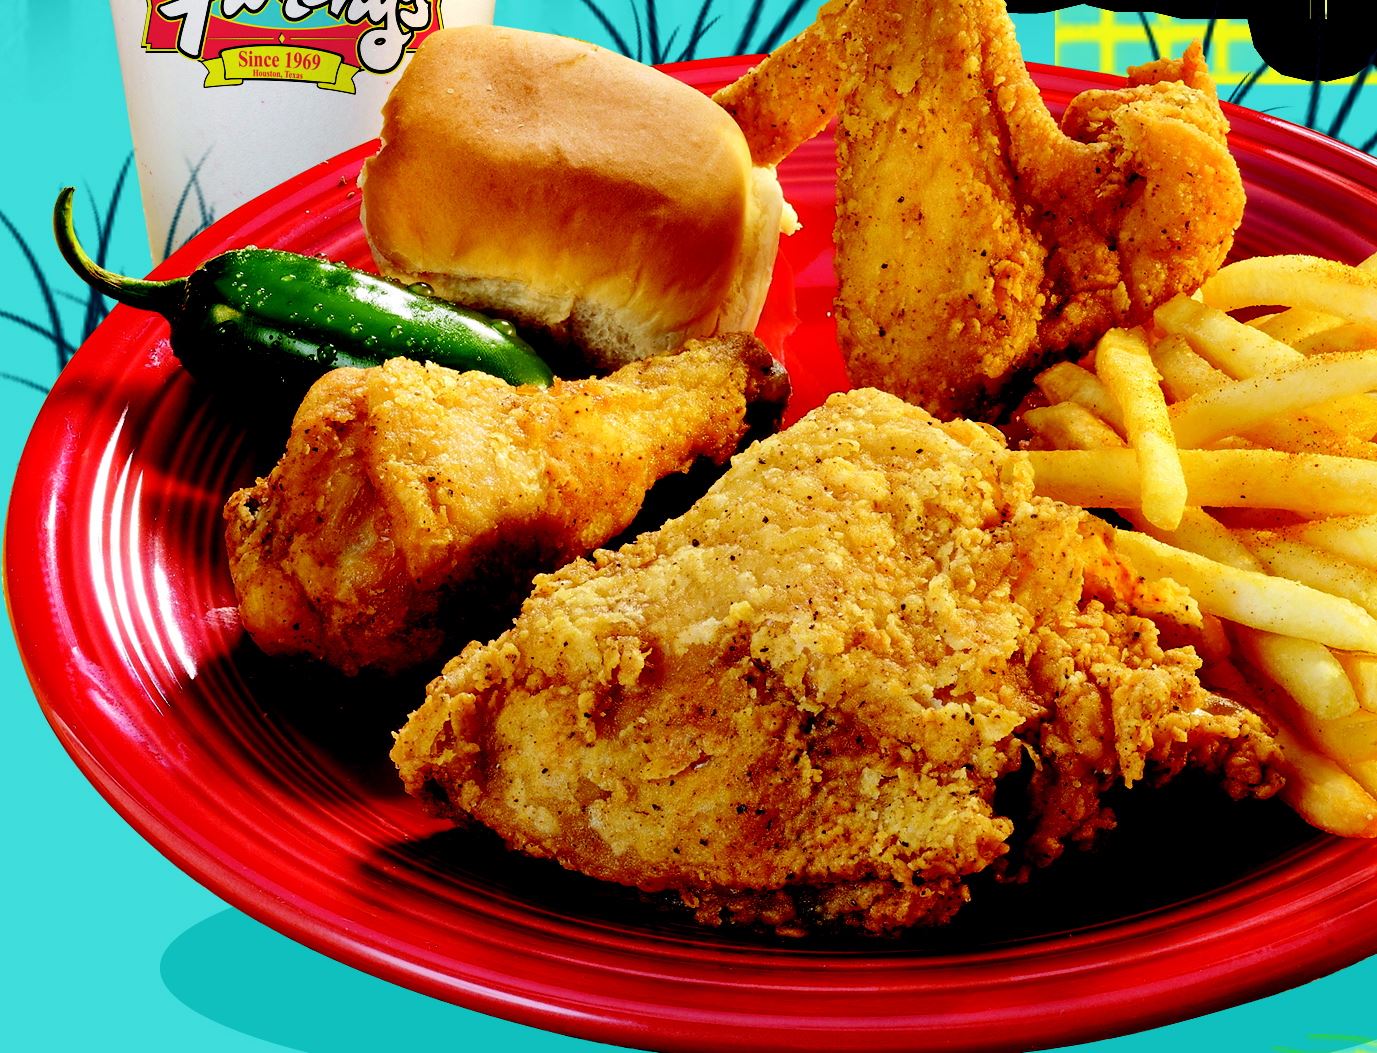 Frenchy’s fried chicken with french fries, roll, and jalapeno.